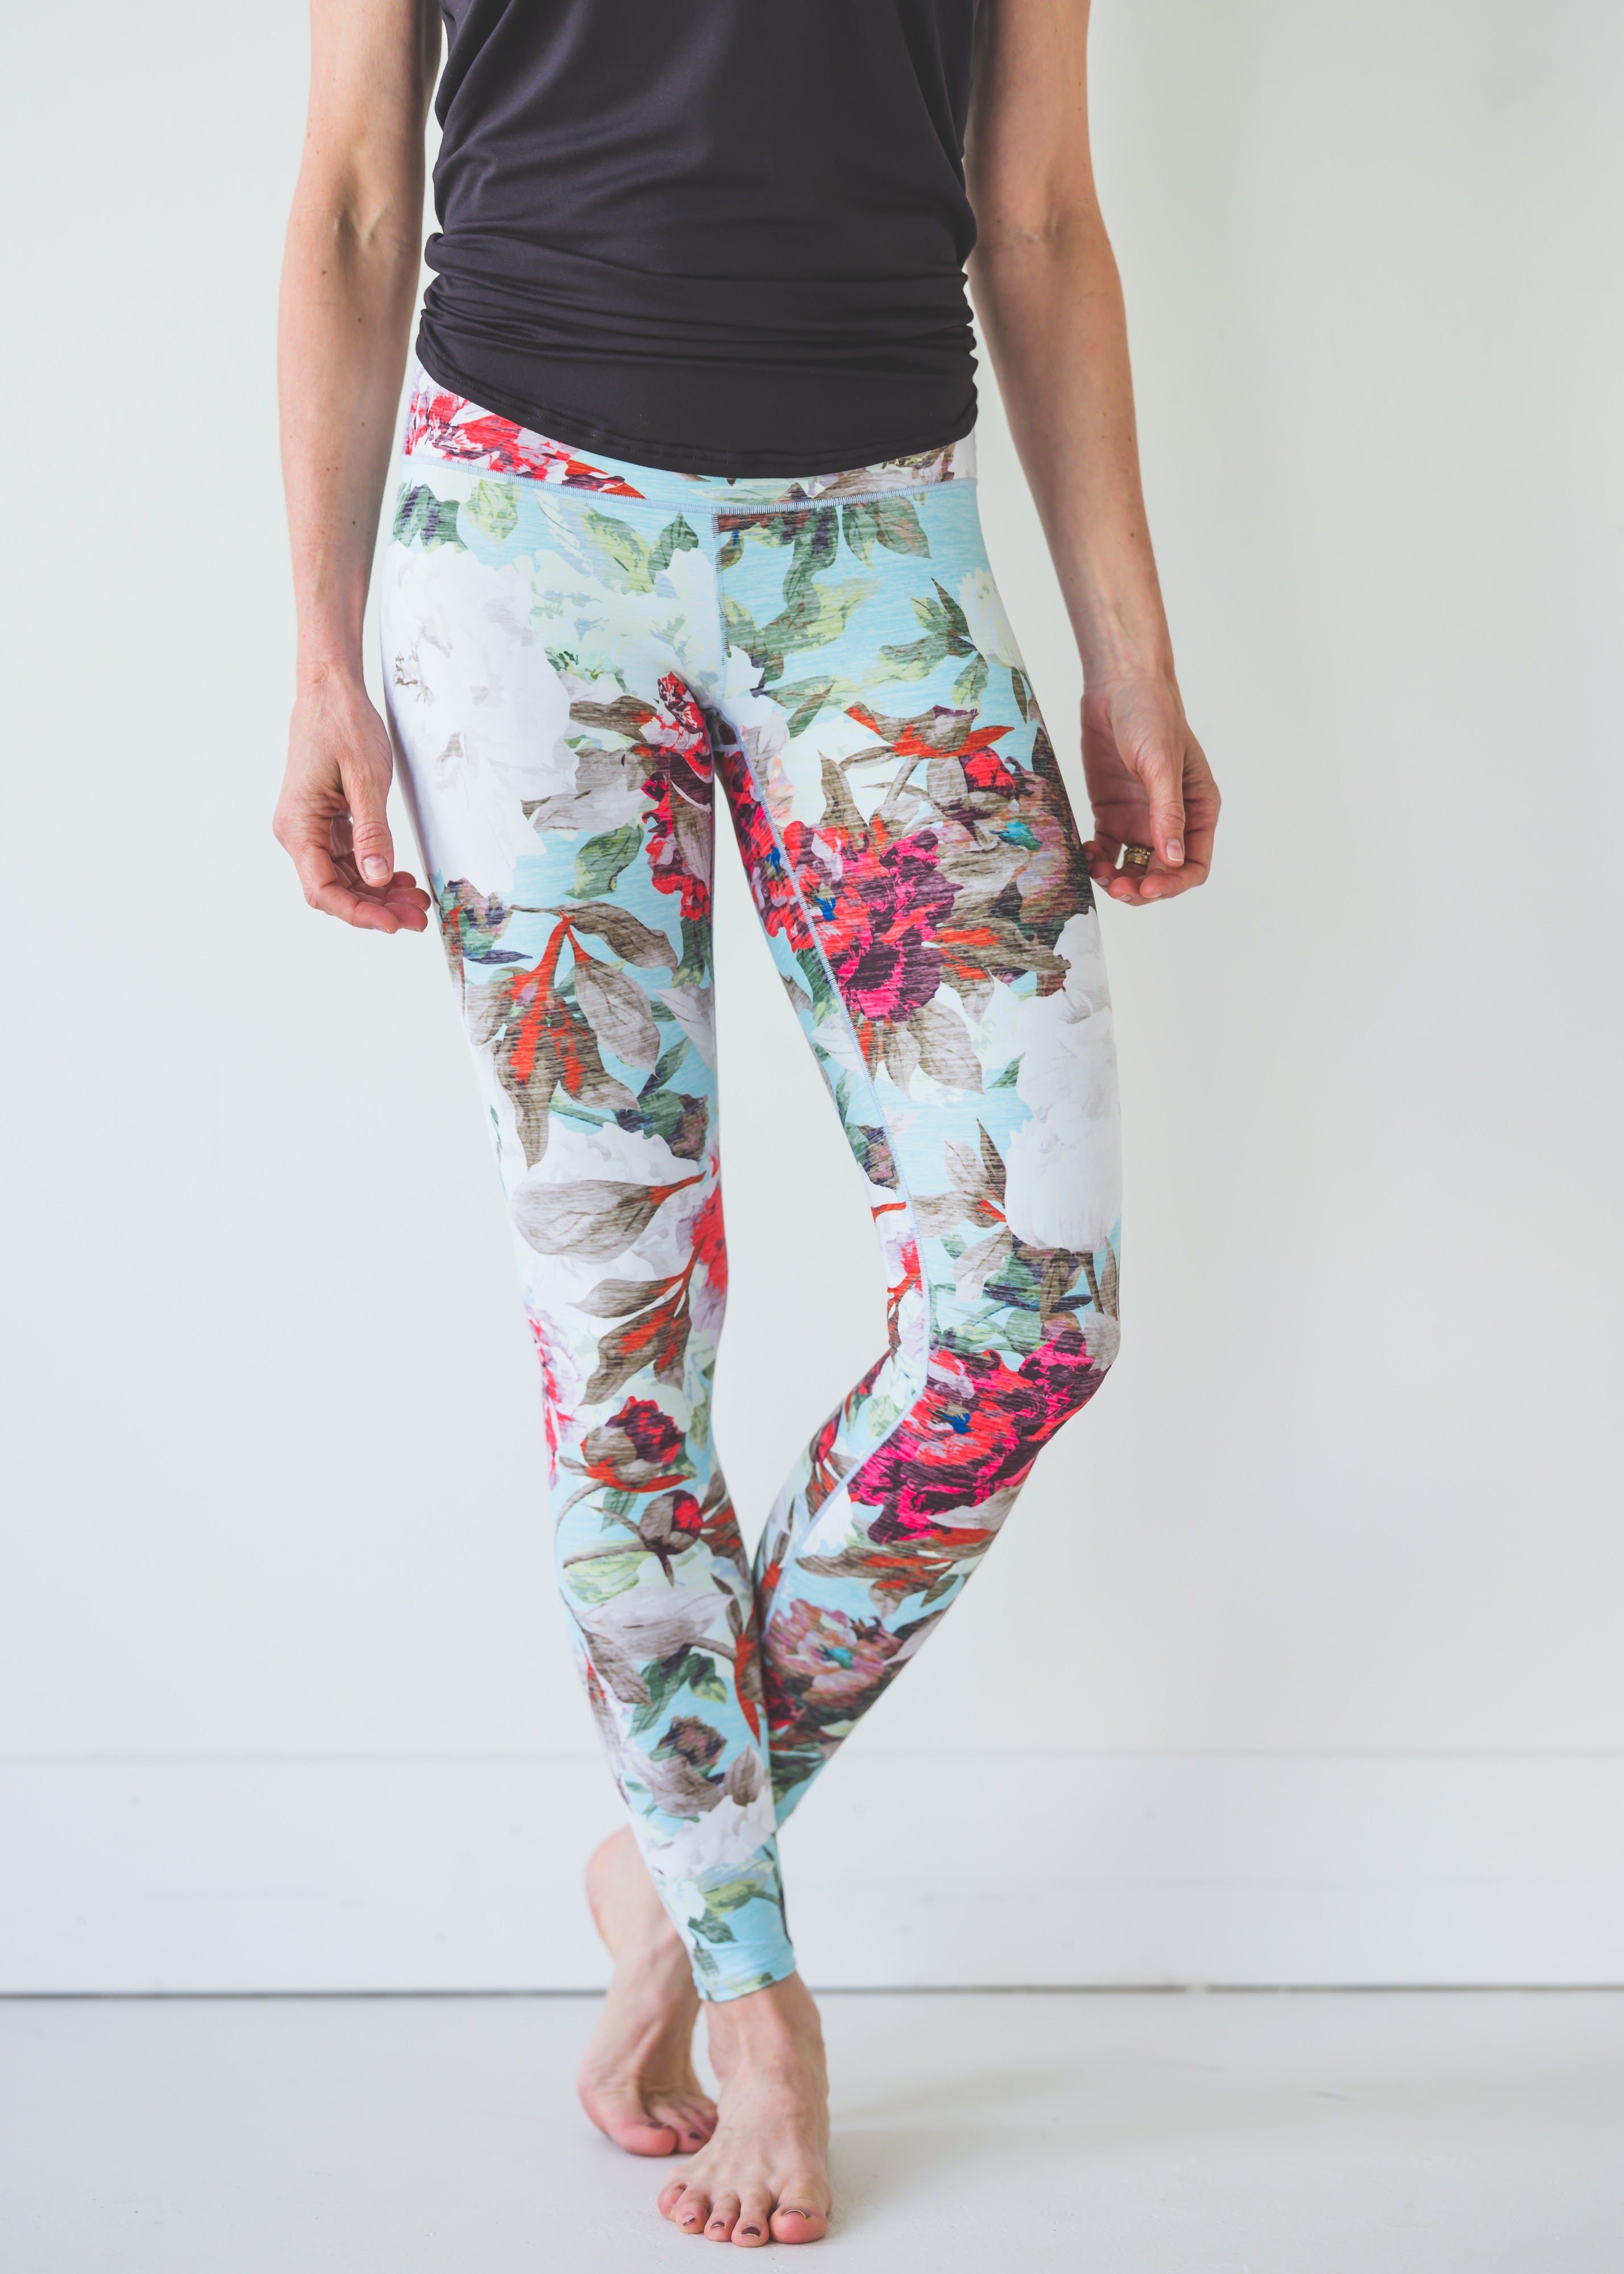 Teal Floral Yoga Pants *FINAL SALE* Colorado Threads Clothing